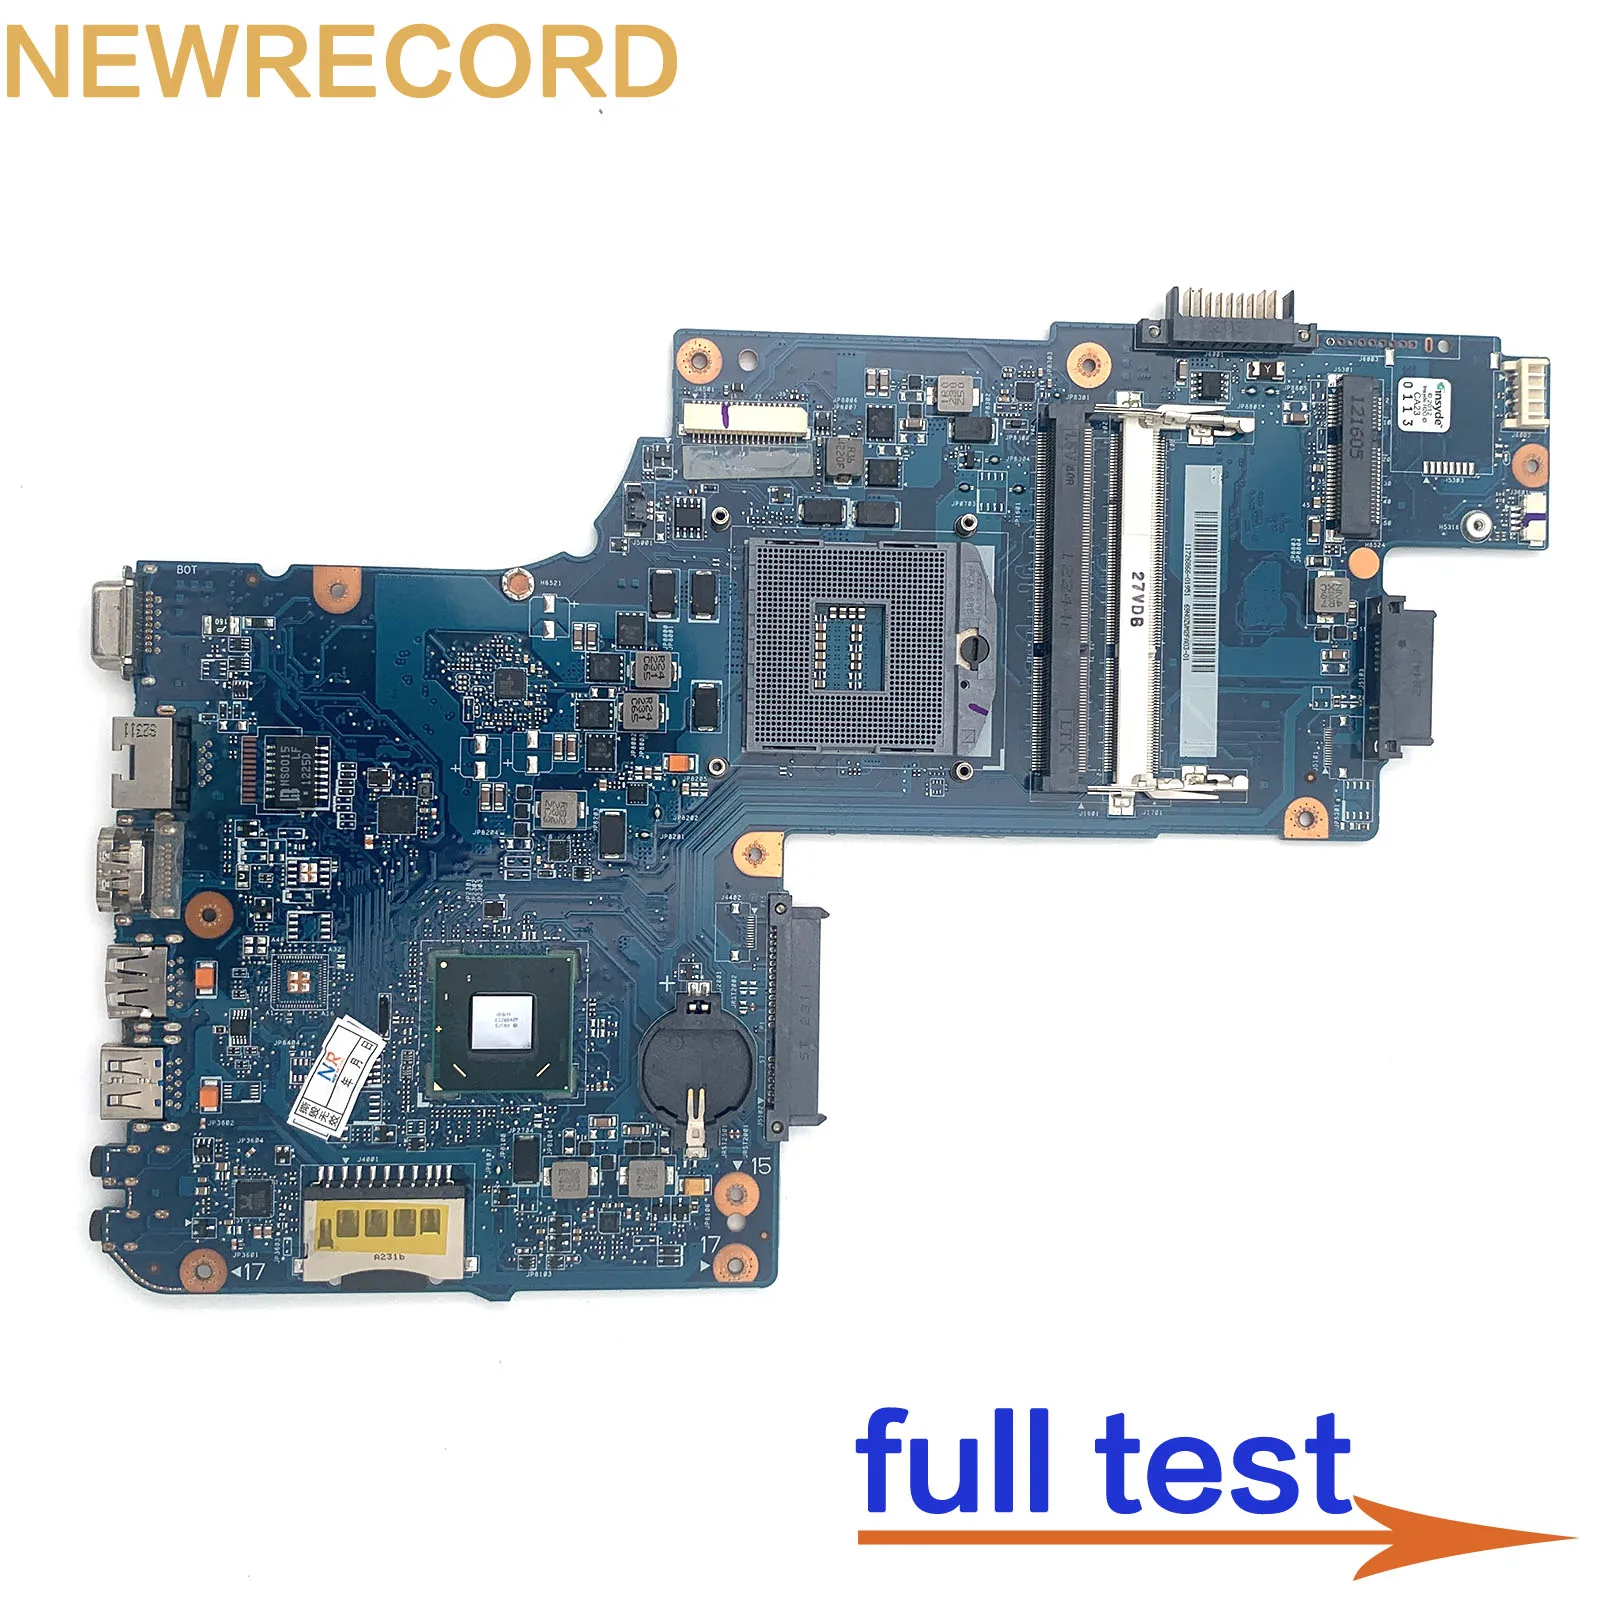 For Toshiba Satellite C850 L850 C855 L855 Notebook Motherboard SJTNV HM70 DDR3 Free CPU H000050780 H000052610